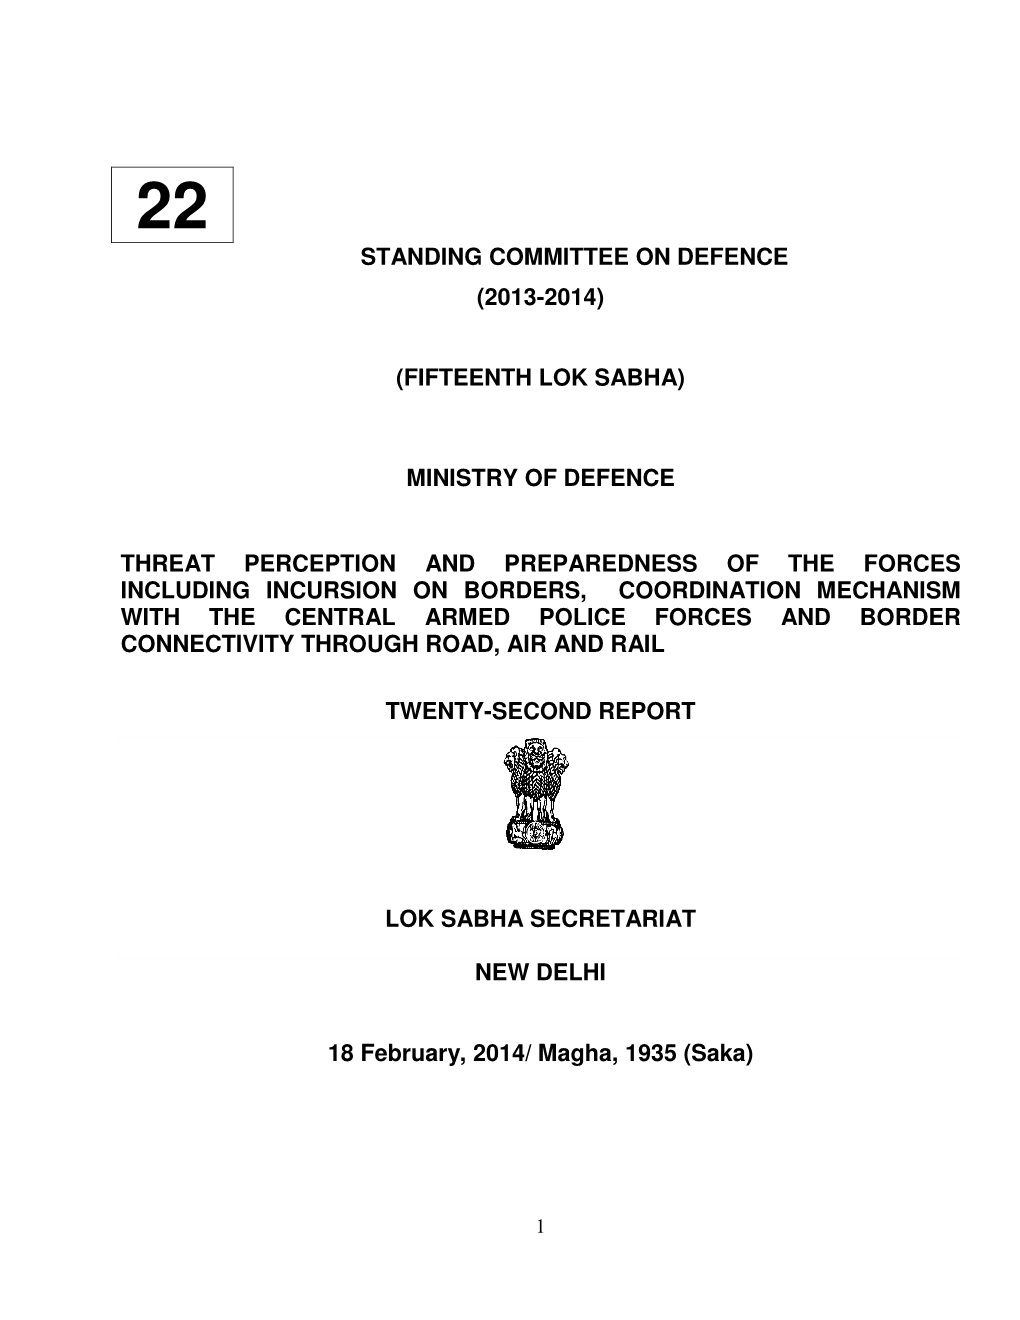 Standing Committee on Defence (2013-2014)